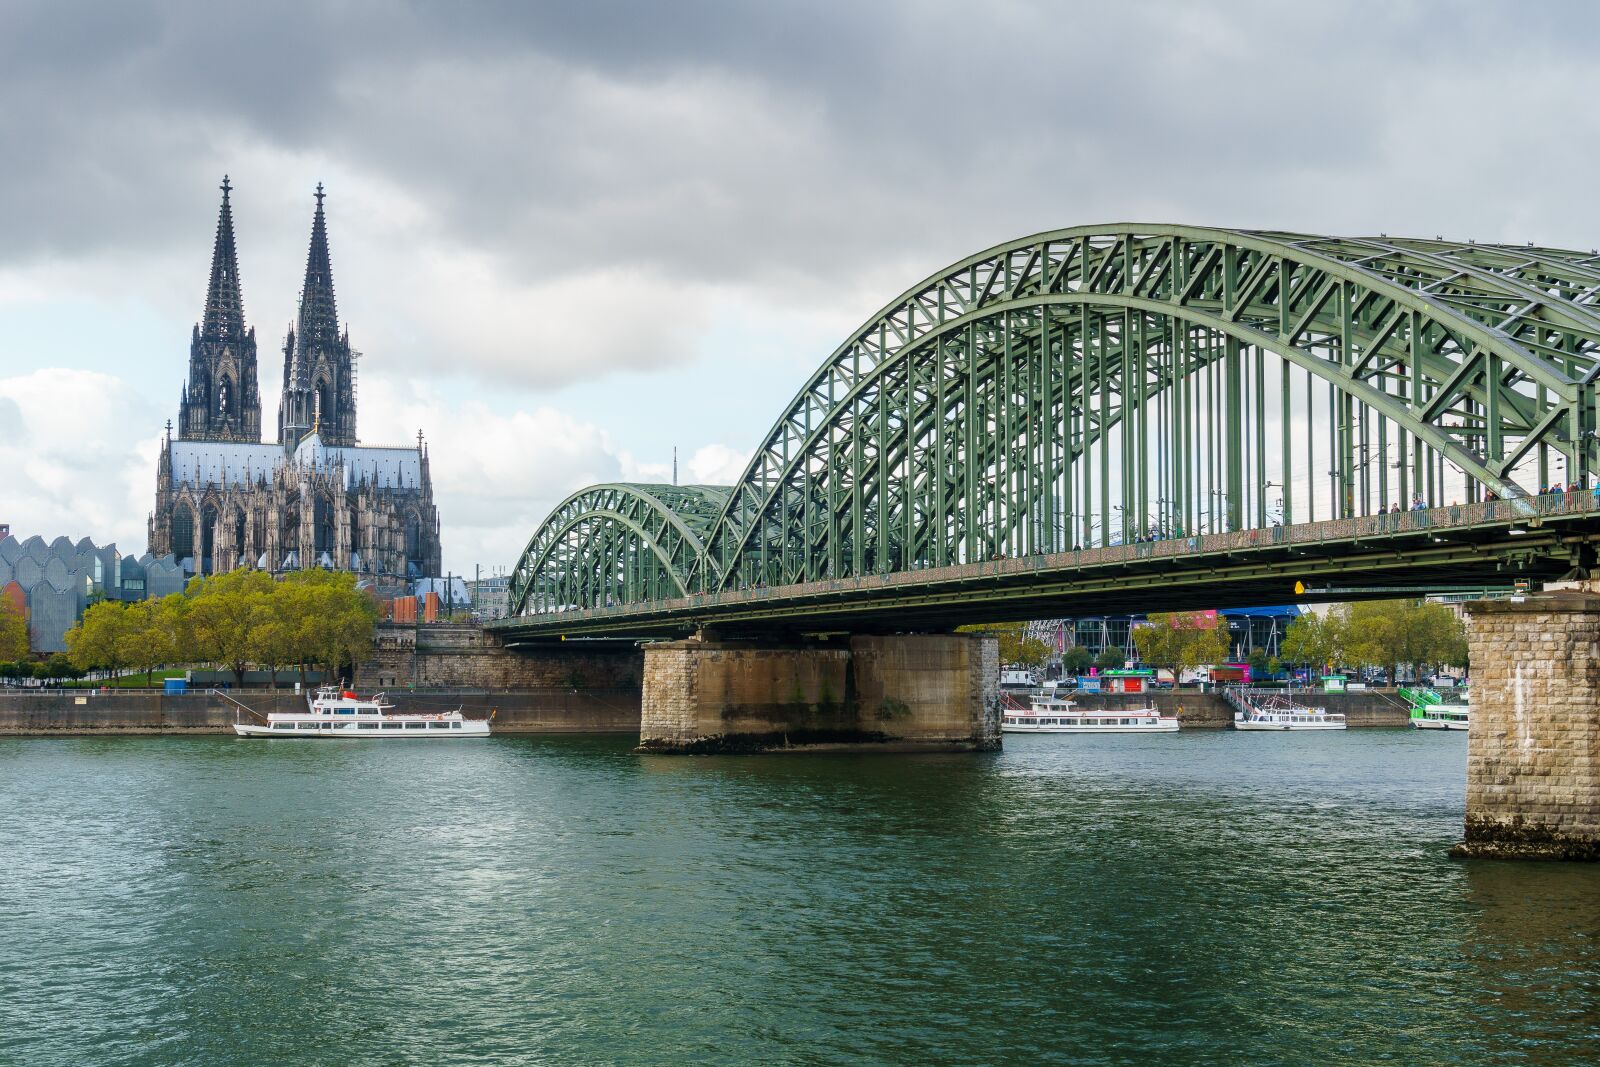 Sony a6000 sample photo. Cologne, cologne cathedral, rhine photography